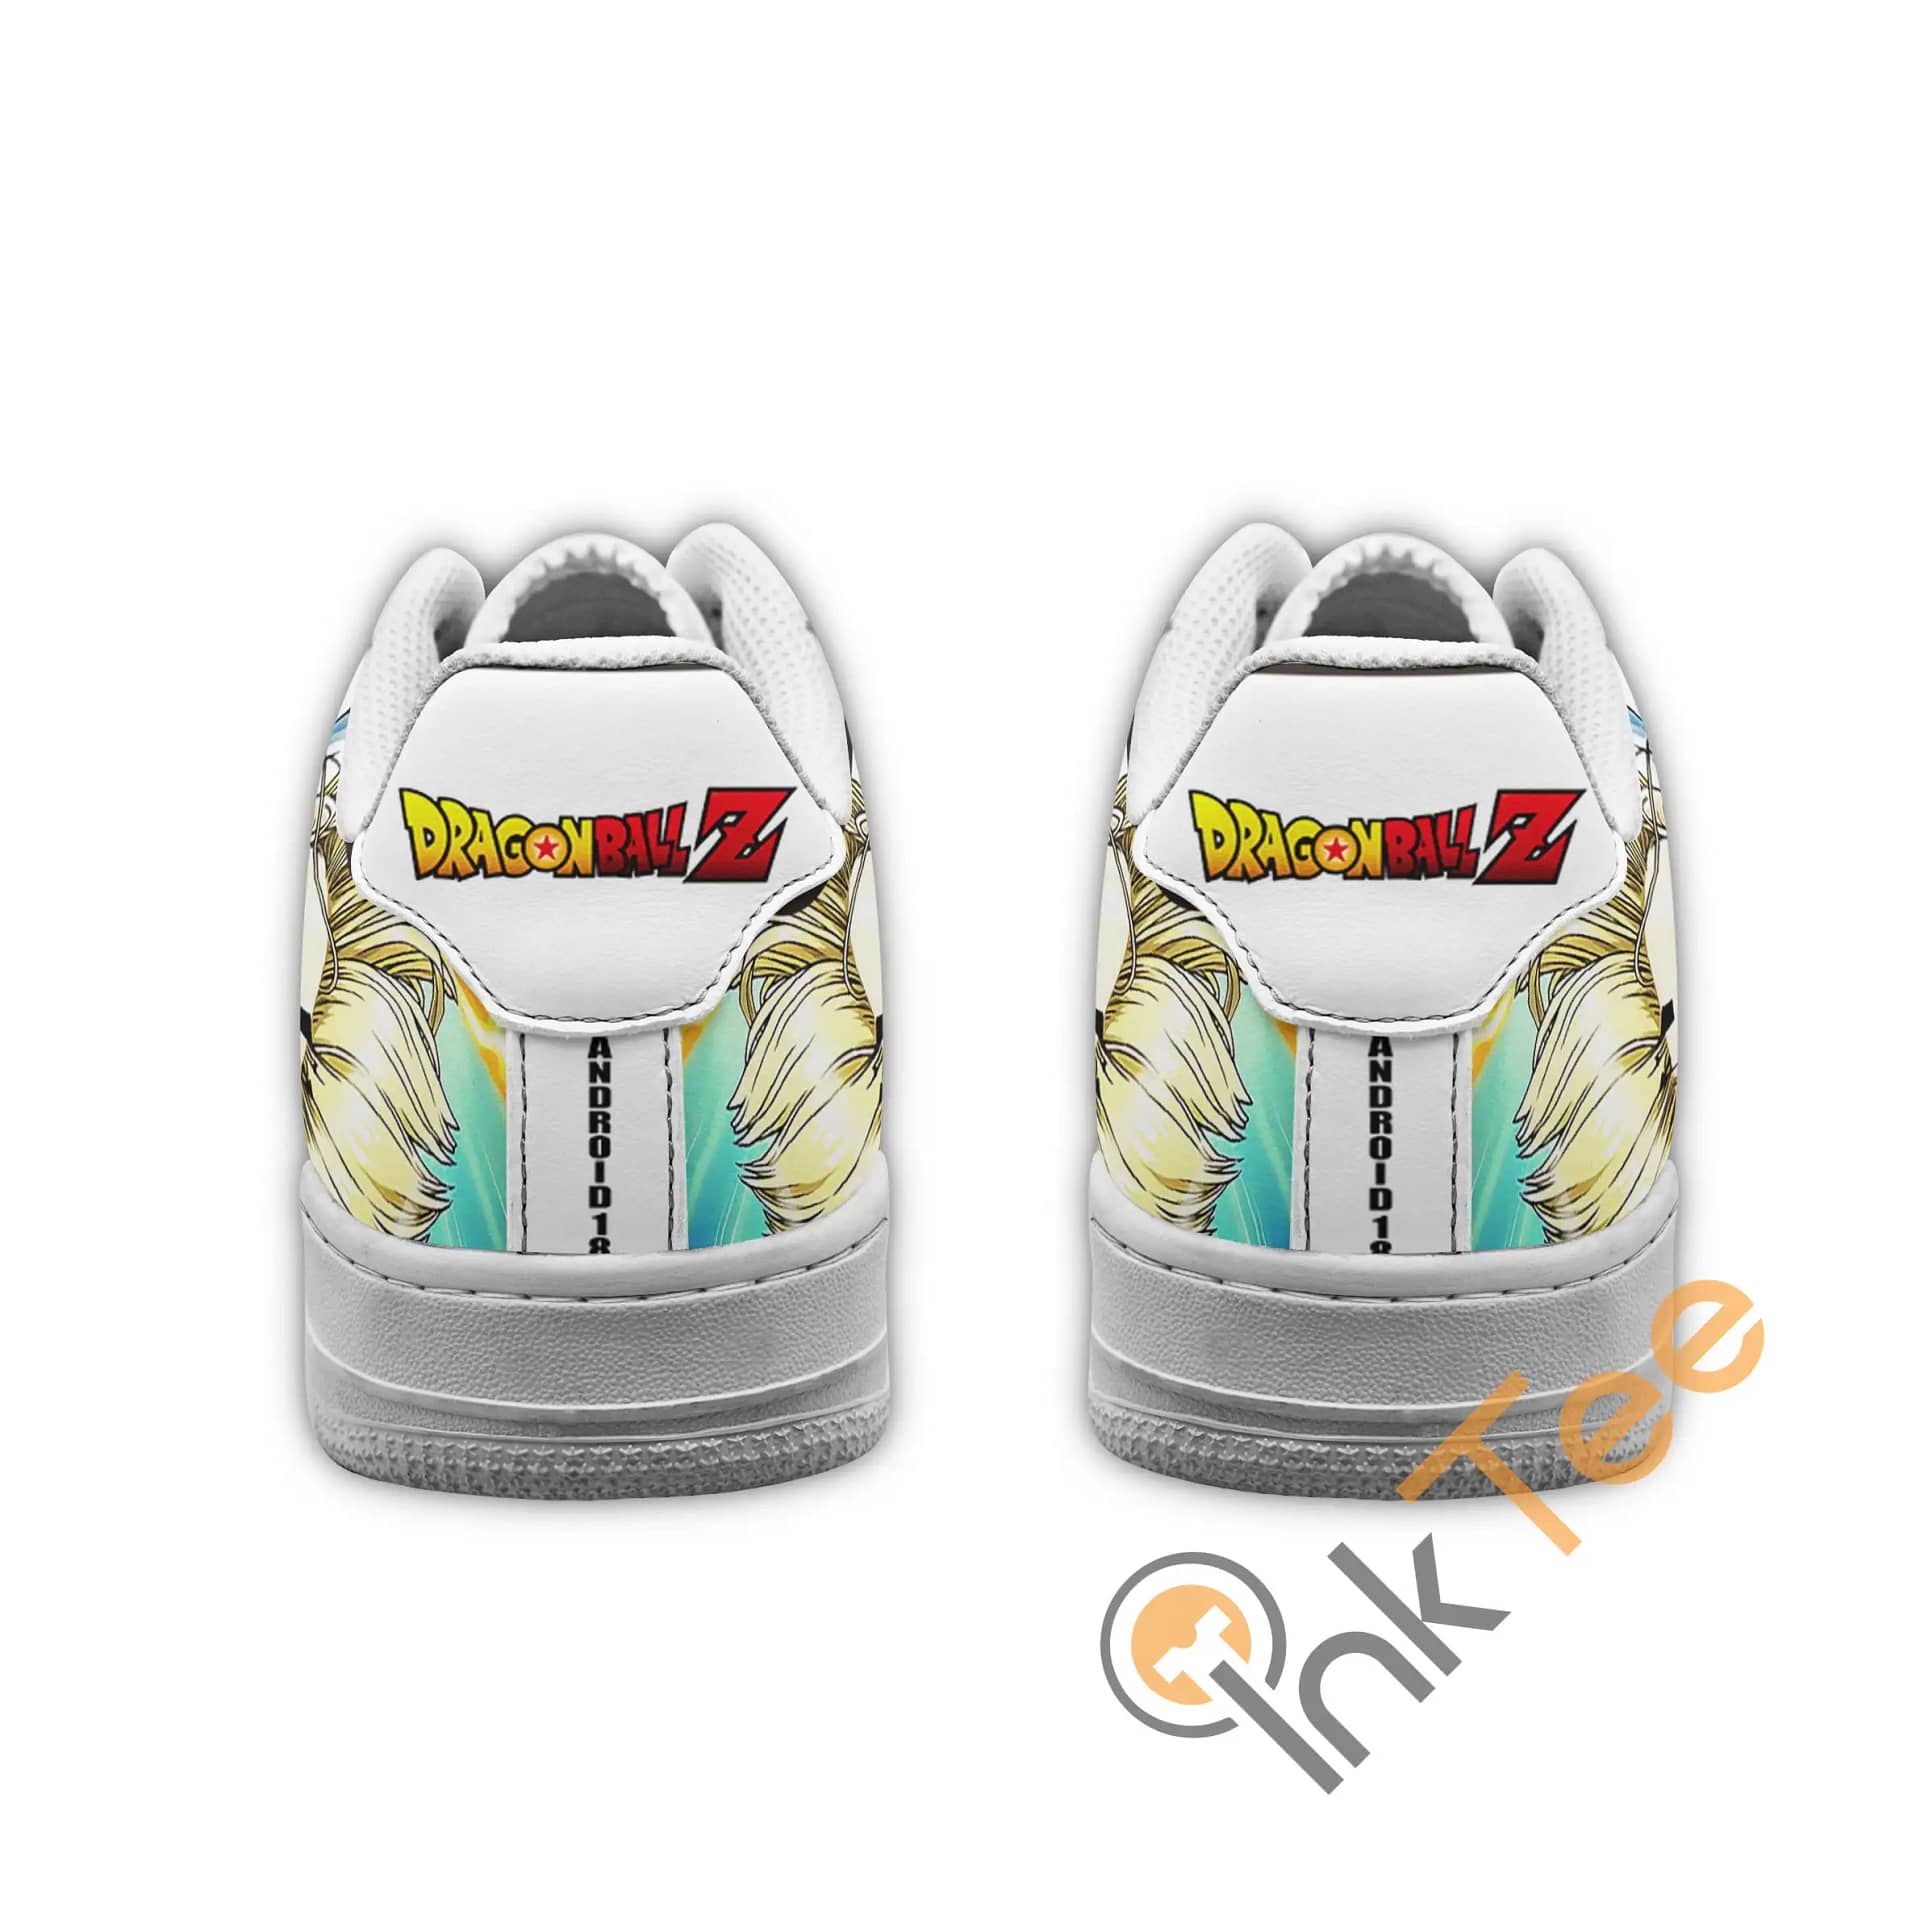 Android 18 Dragon Ball Z Anime Fan Gift Amazon Nike Air Force Shoes